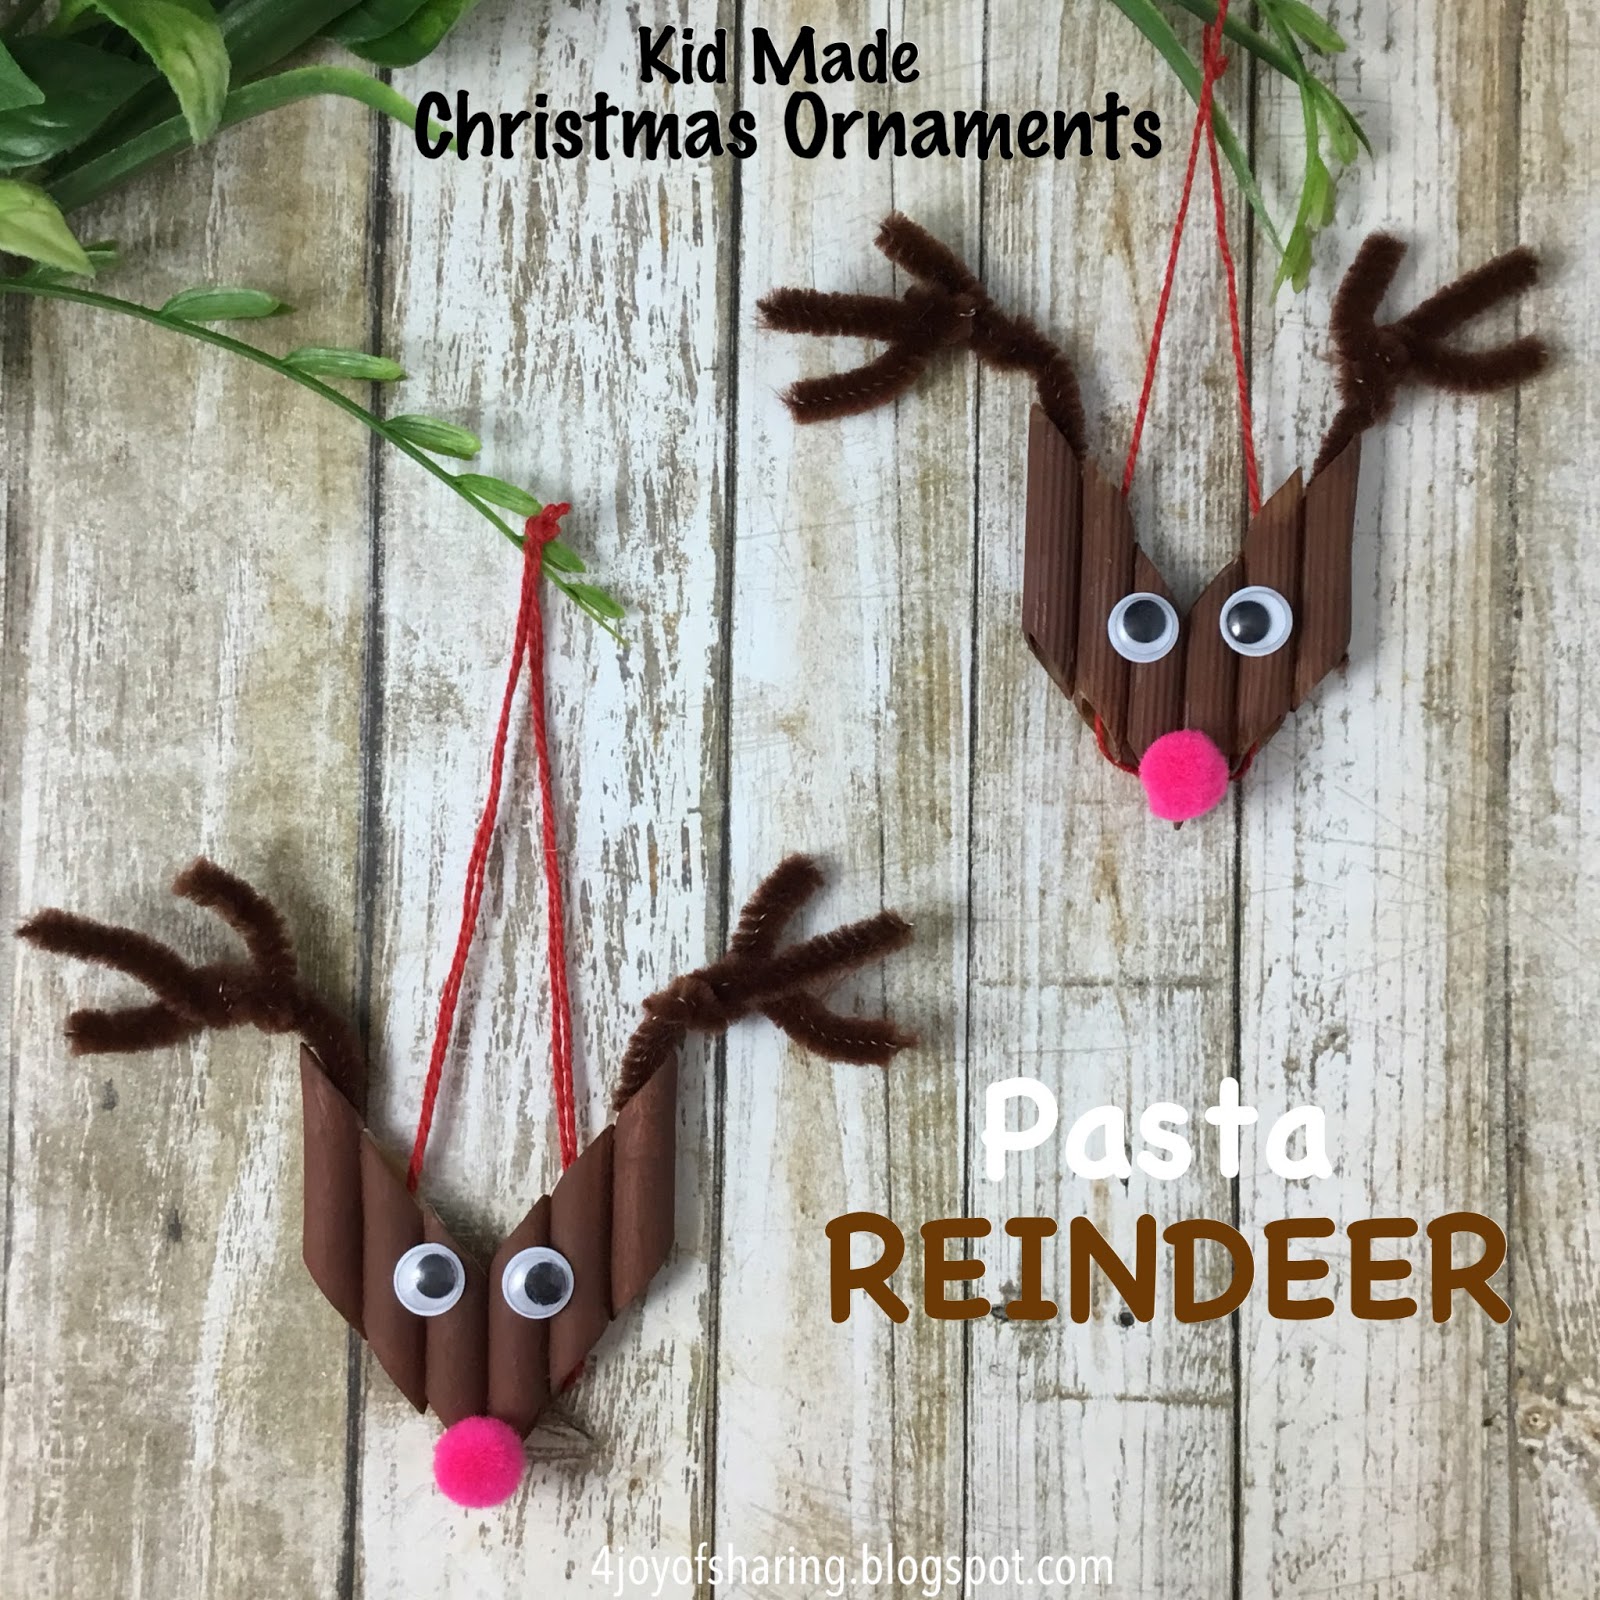 Christmas crafts, christmas decoration, christmas ornaments, pasta craft, reindeer craft, animal craft, kid-made decoration, kid-made, handmade, crafts, Kids craft, crafts for kids, craft ideas, kids crafts, craft ideas for kids, paper craft, art projects for kids, easy crafts for kids, fun craft for kids, kids arts and crafts, art activities for kids, kids projects, art and crafts ideas. toddler crafts, toddler fun, preschool craft ideas, kindergarten crafts, crafts for young kids